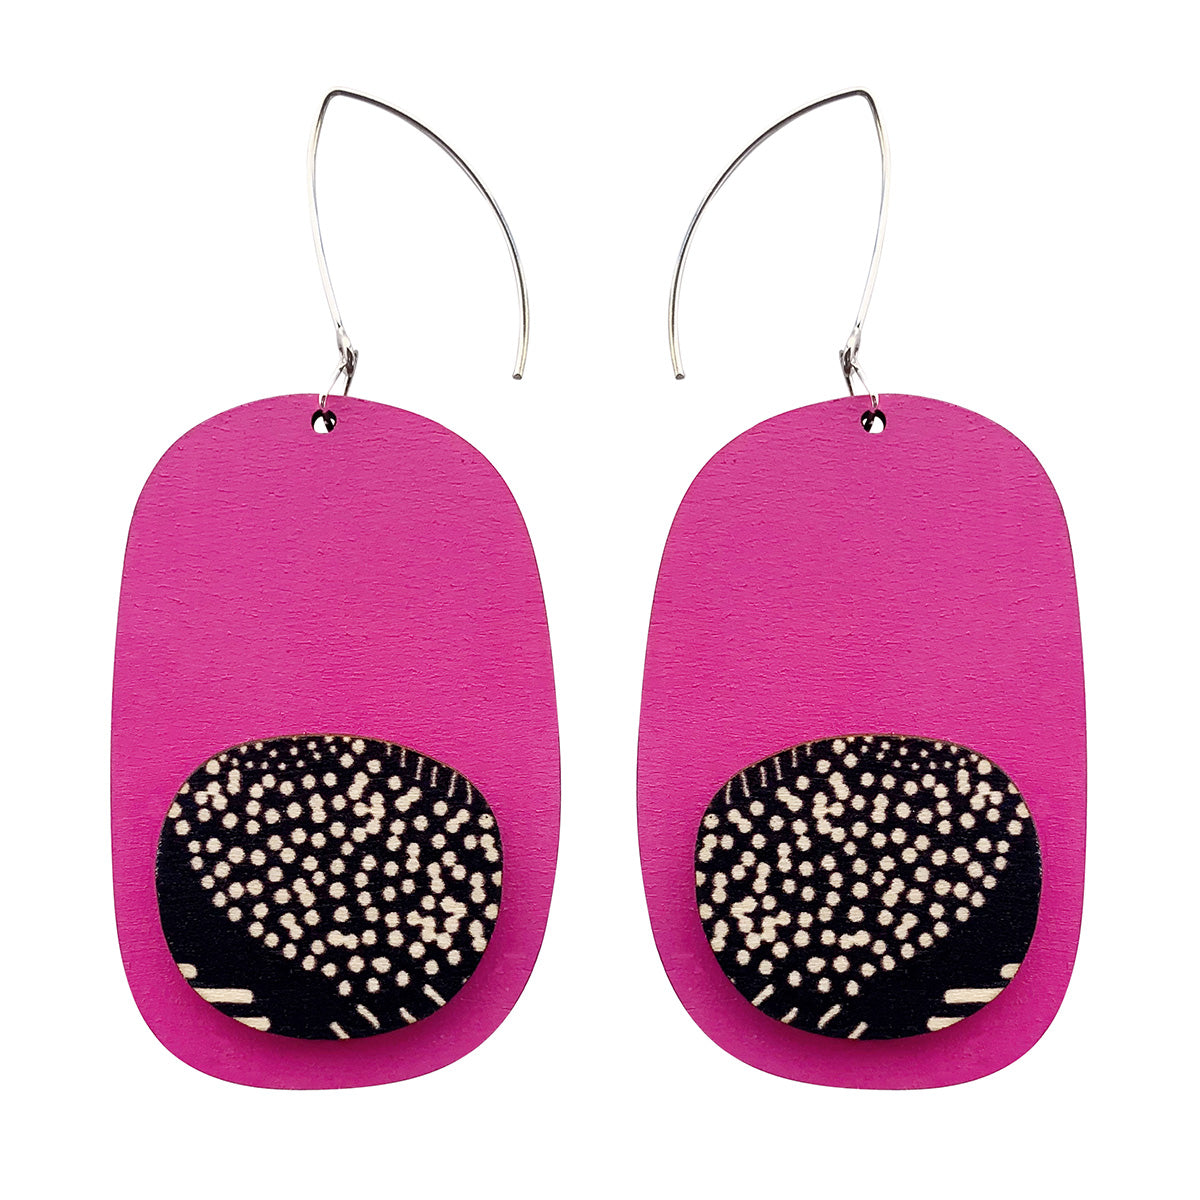 Drop double layer earrings in pink and Night Garden pattern